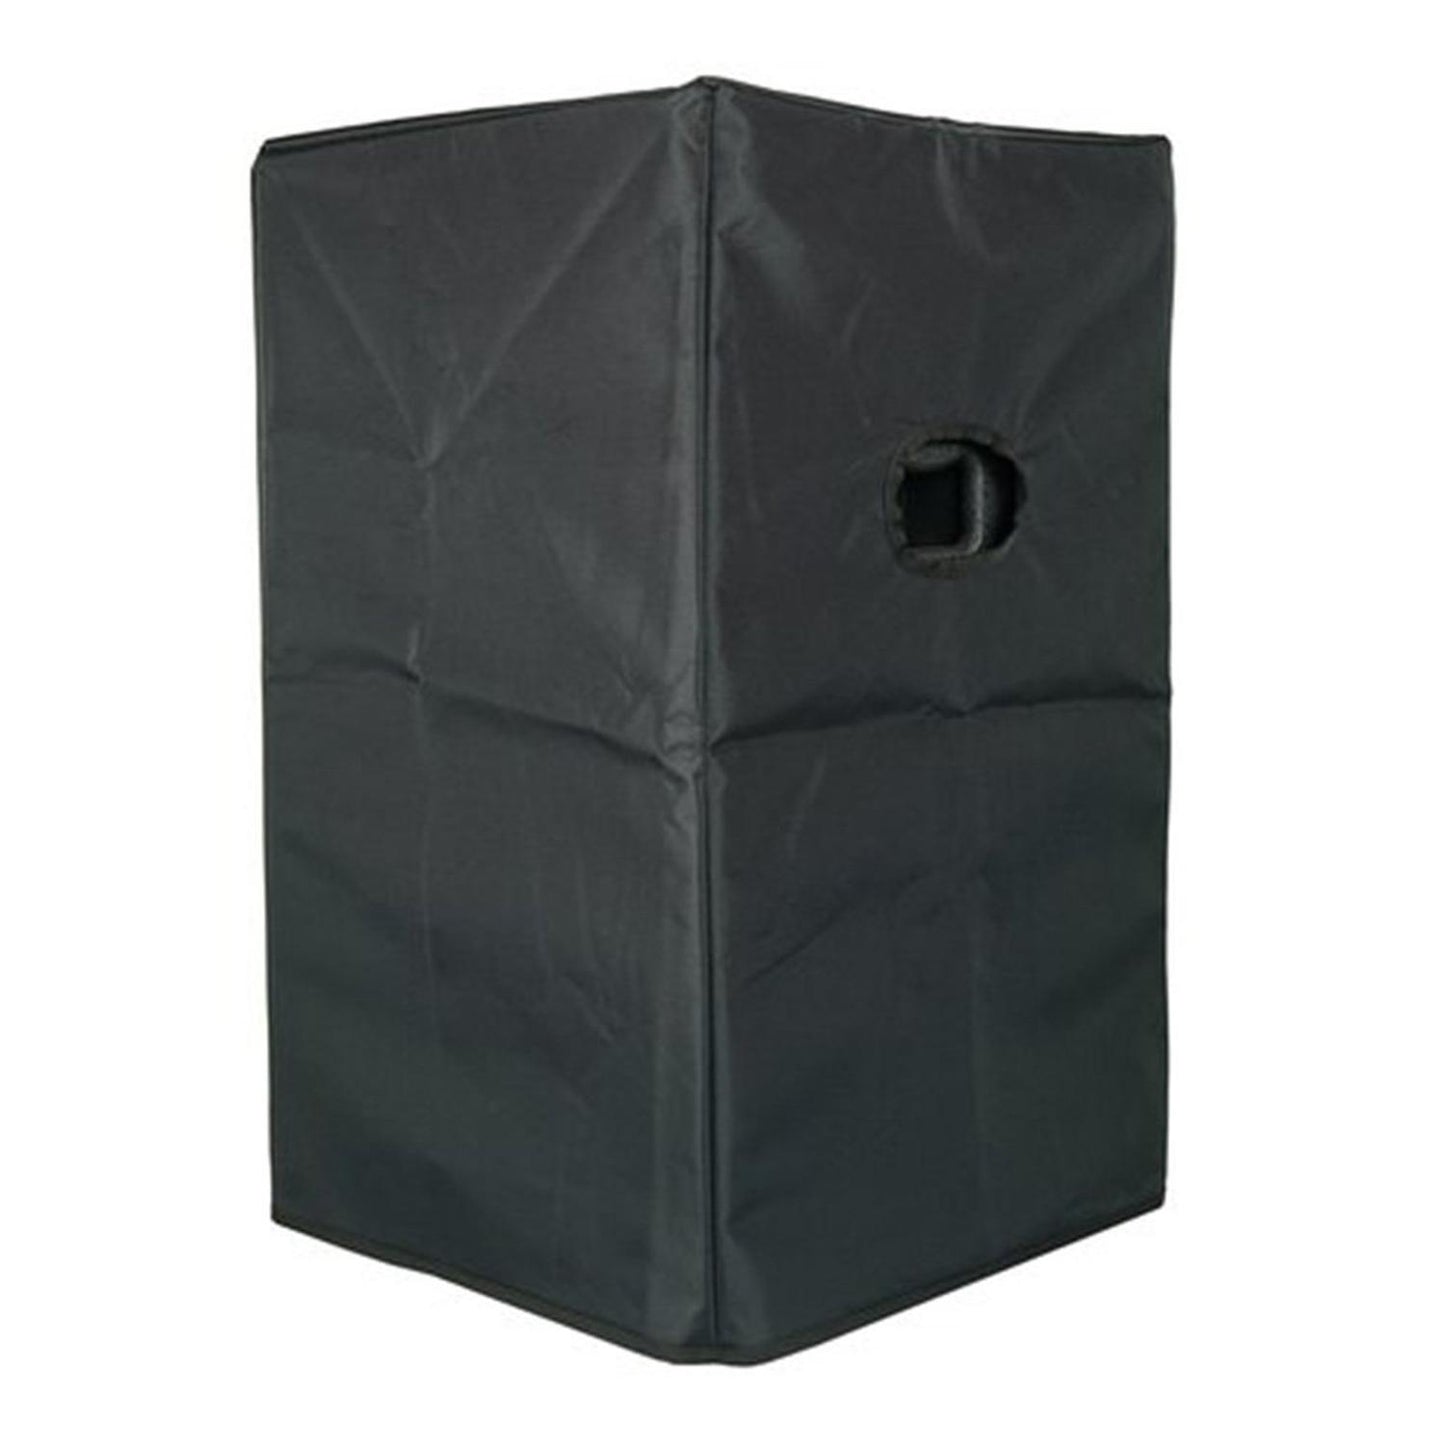 Cubierta subwoofer ac 102 cover MARK